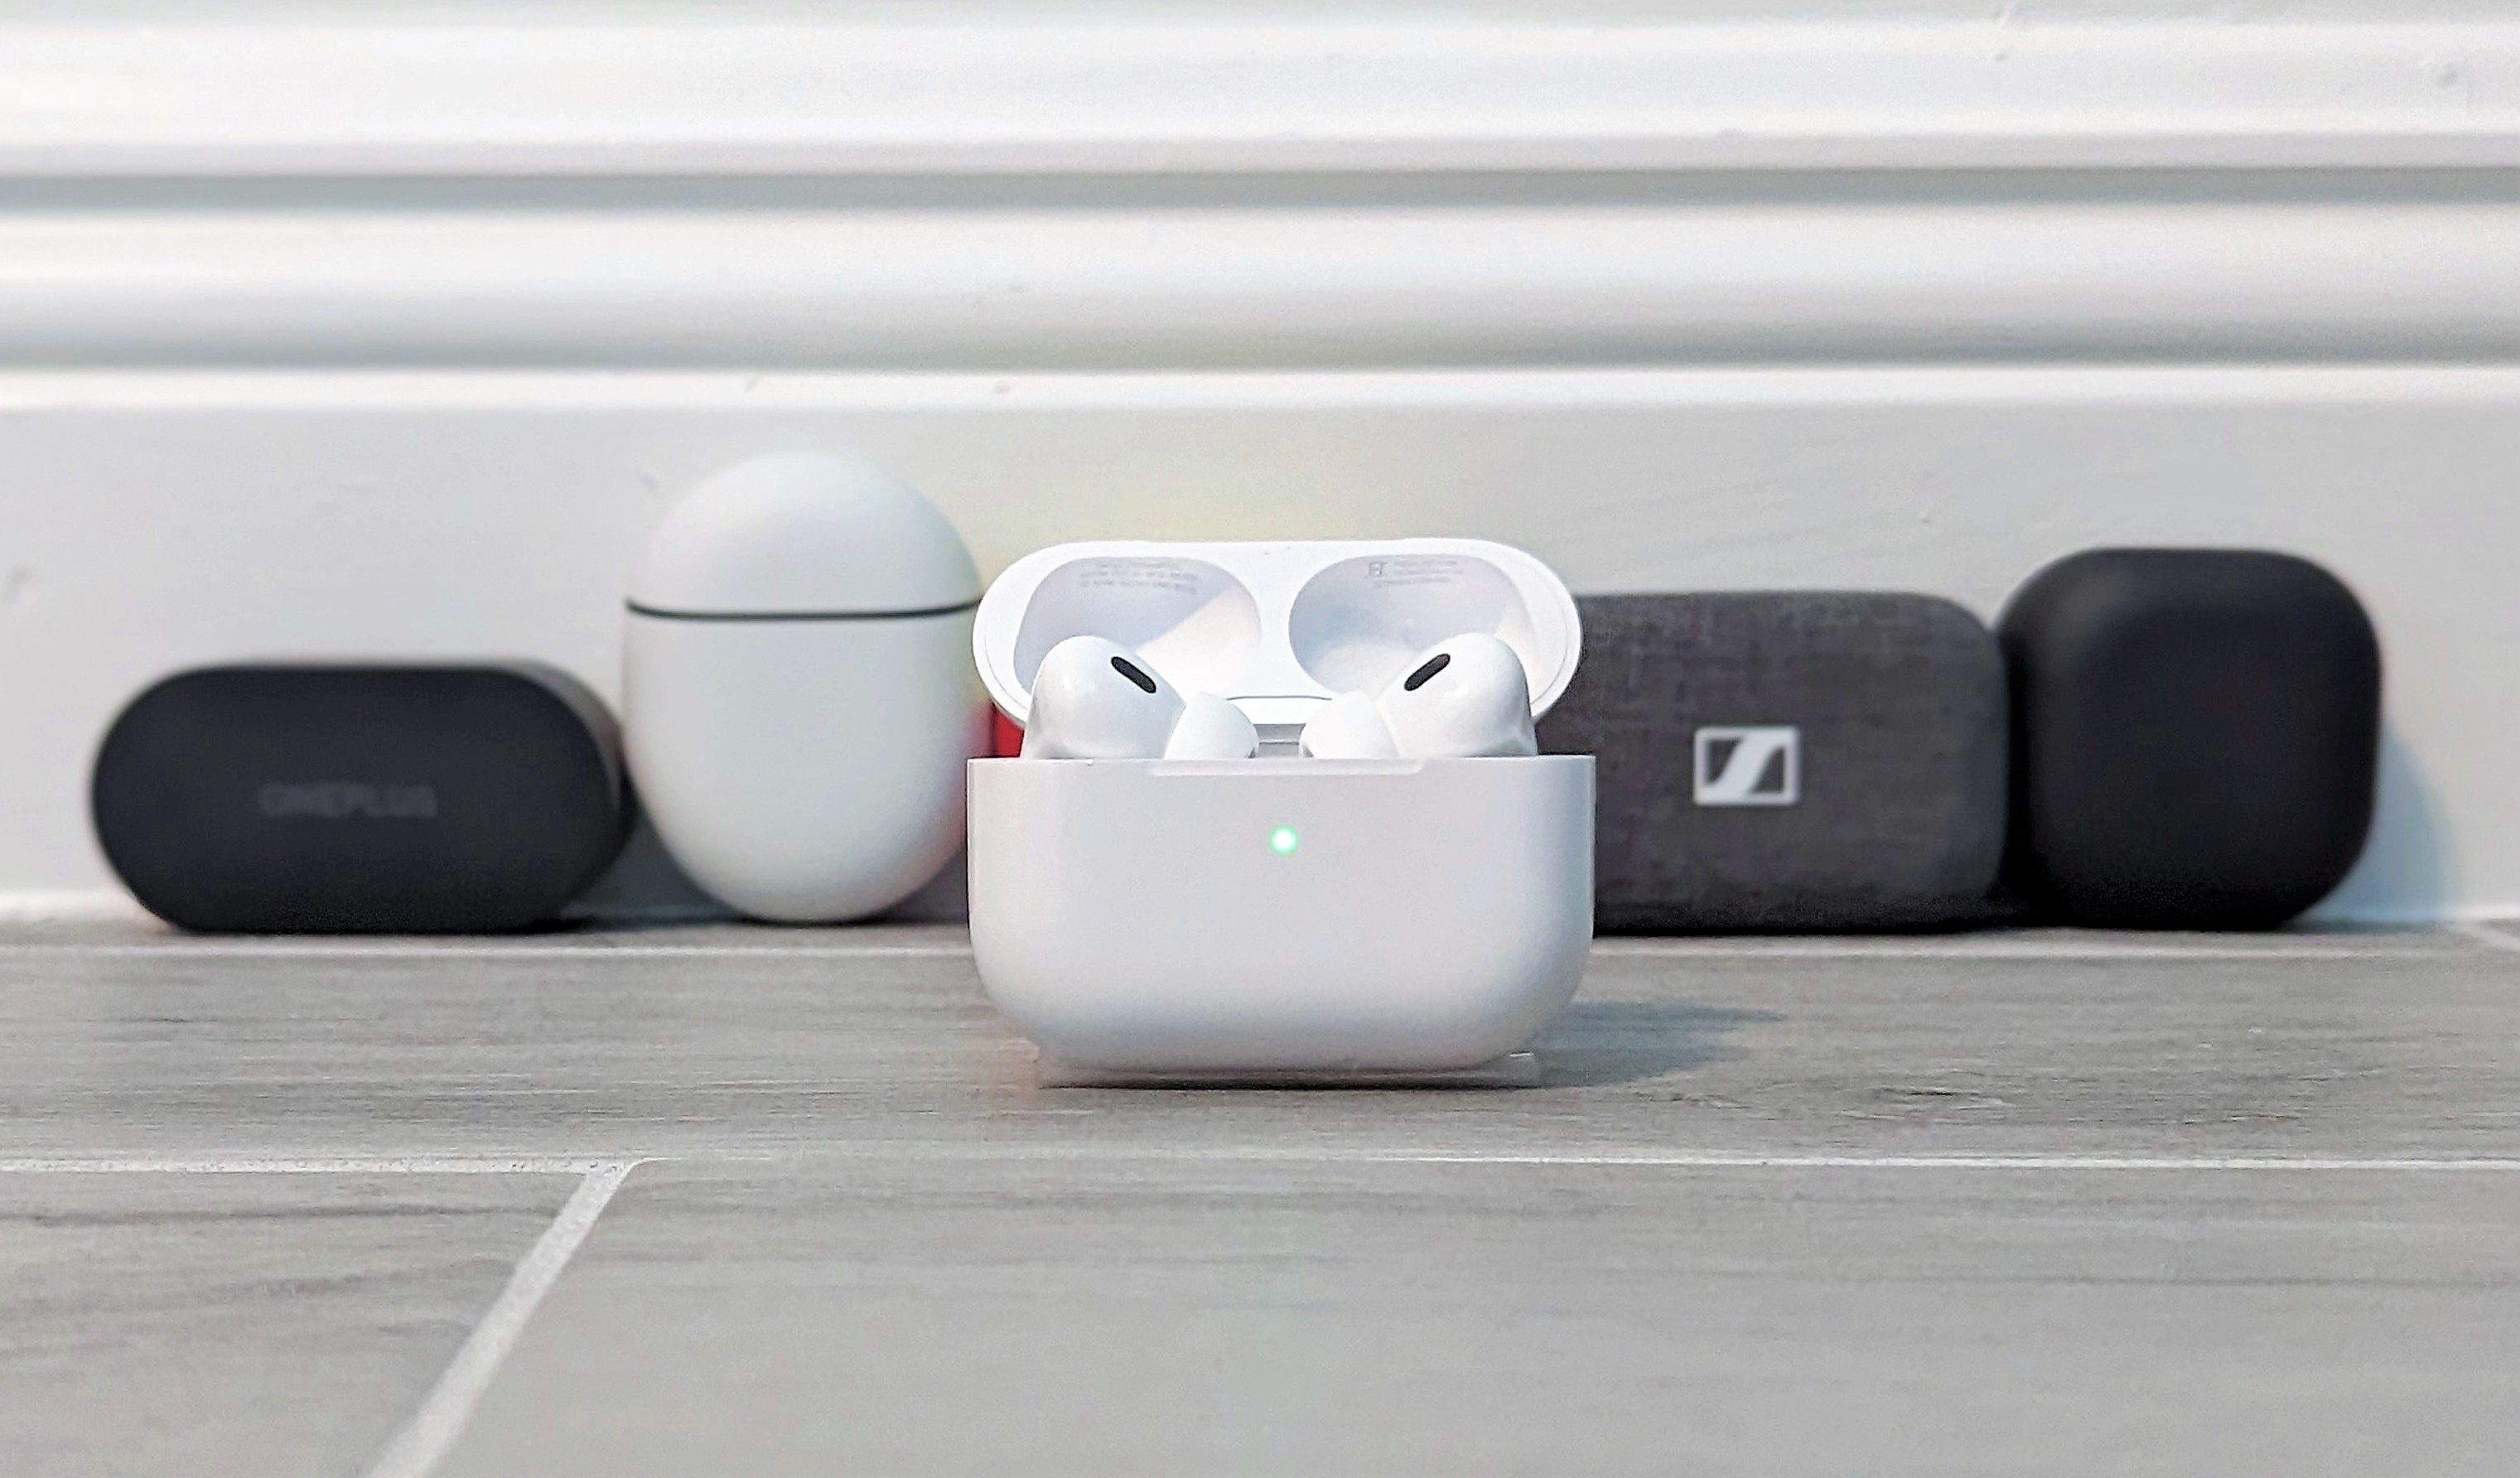 AirPods Pro 2 in the foreground with other models in the background